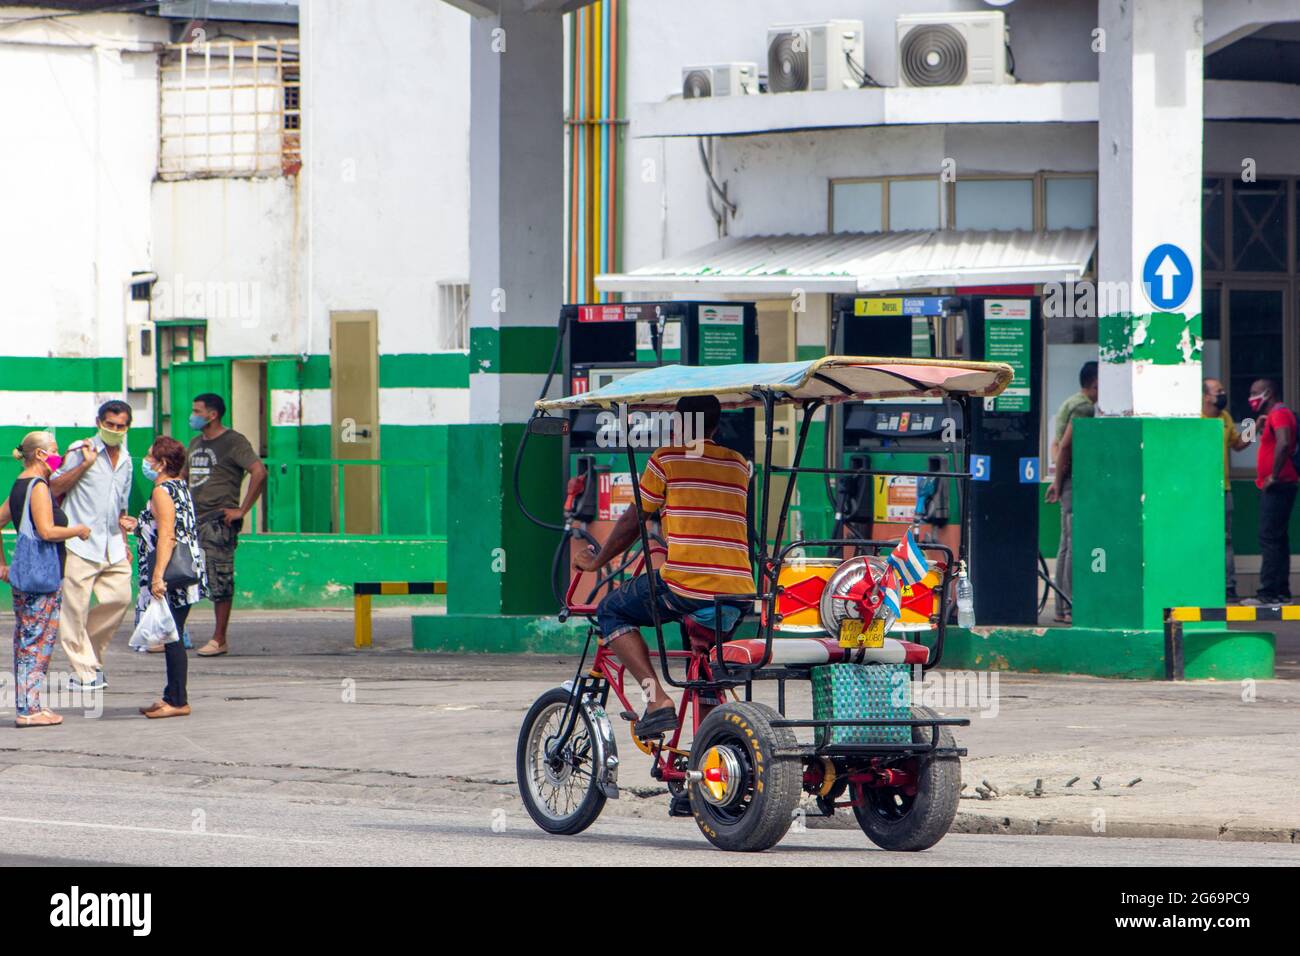 A pedicab or bici-taxi driving on a Santiago de Cuba city street. People with protective face masks are seen in the scene. Stock Photo